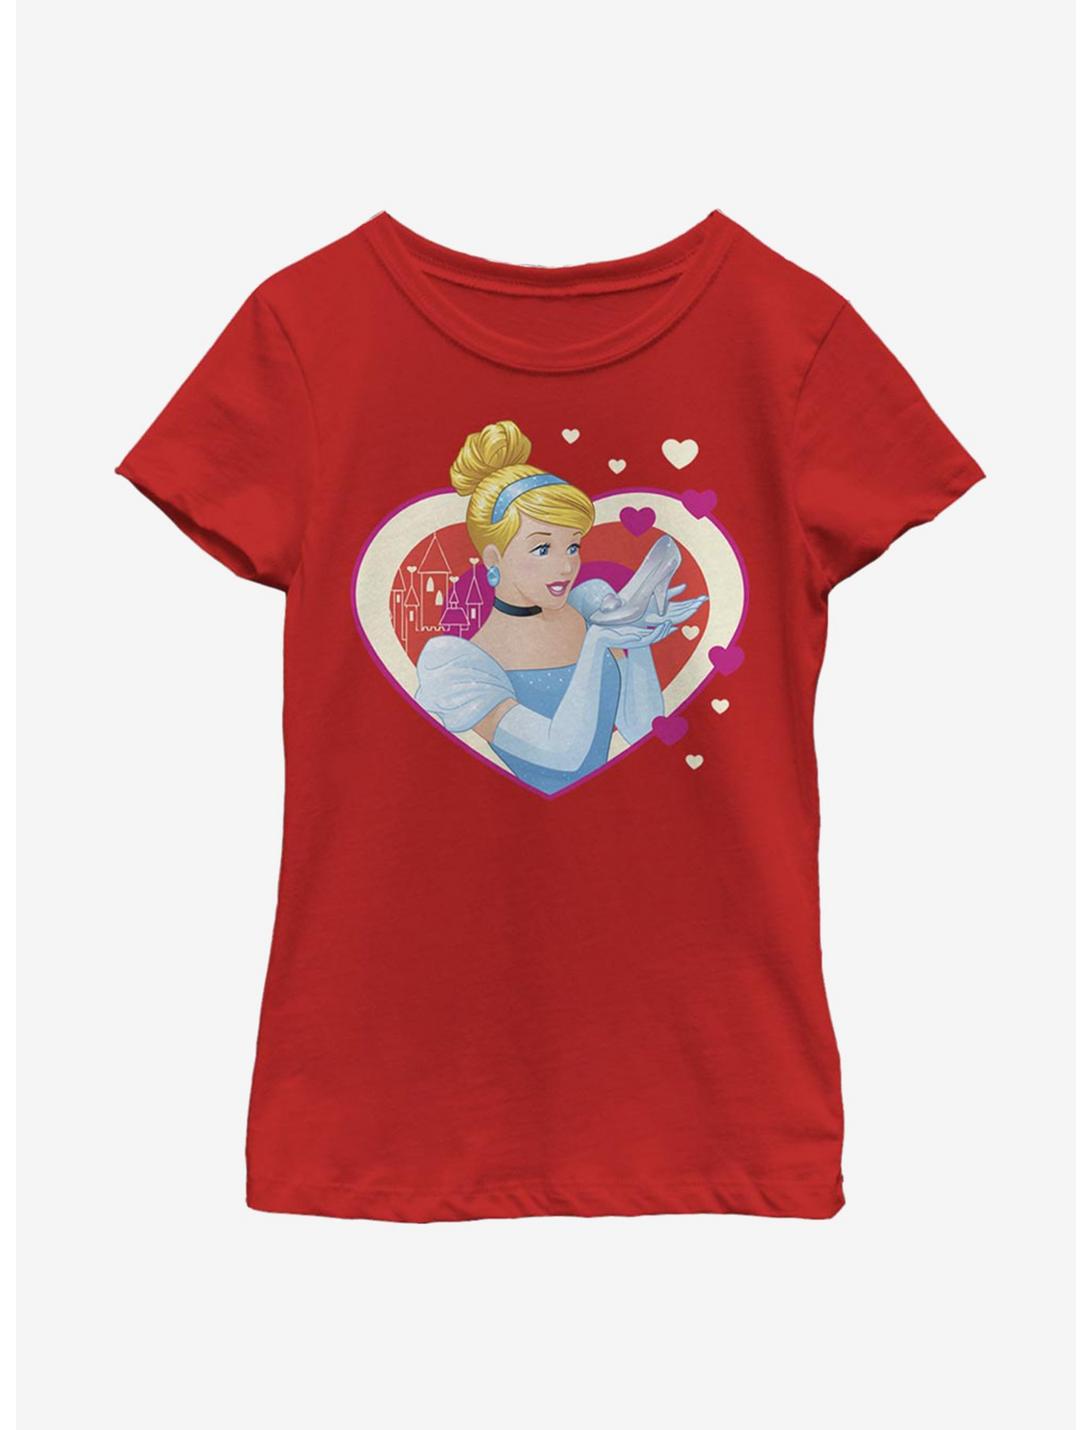 Disney Cinderella The Shoe Fits Youth Girls T-Shirt, RED, hi-res